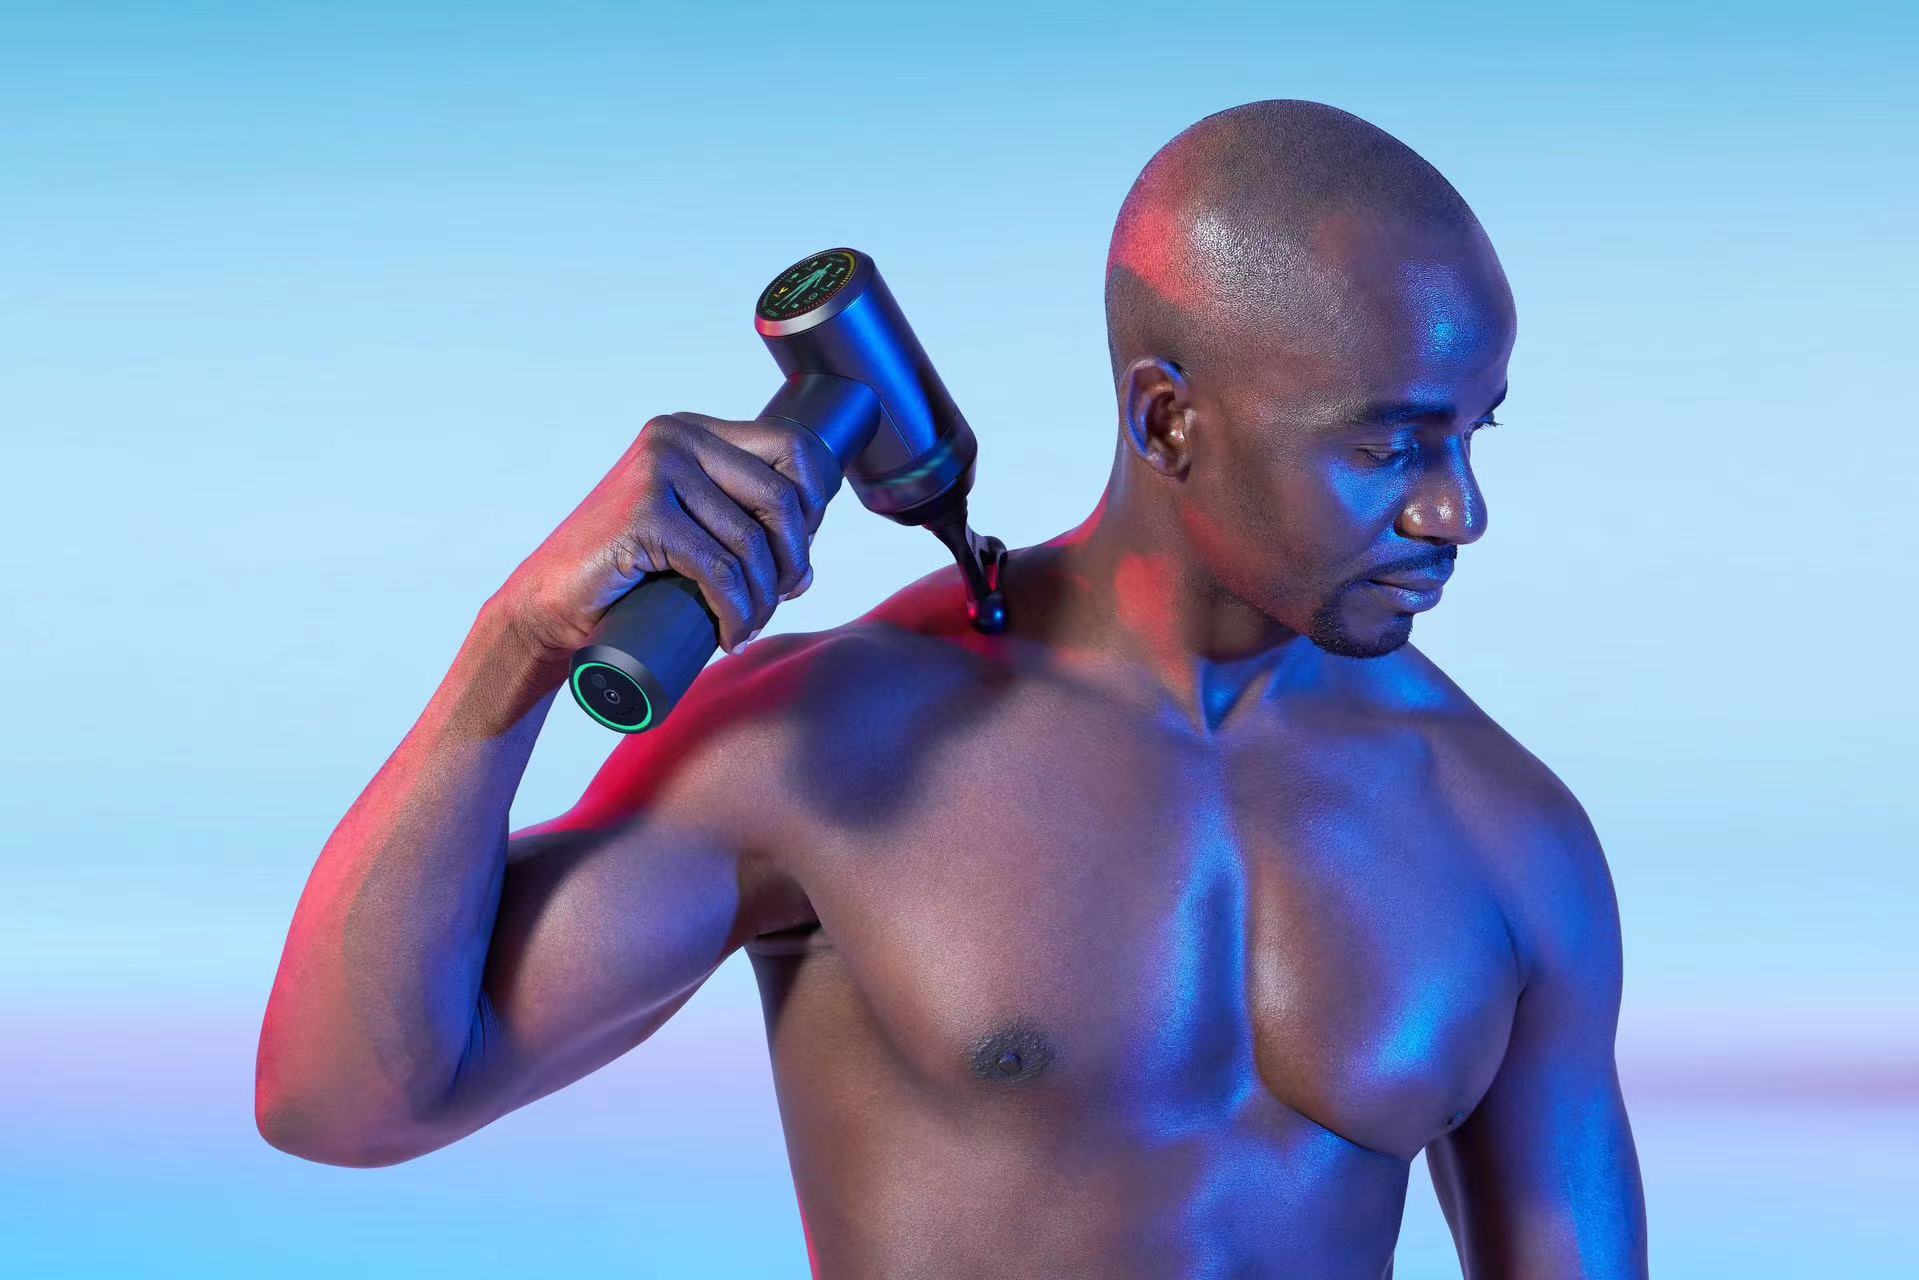 How to Use Massage Gun for Muscle Recovery?